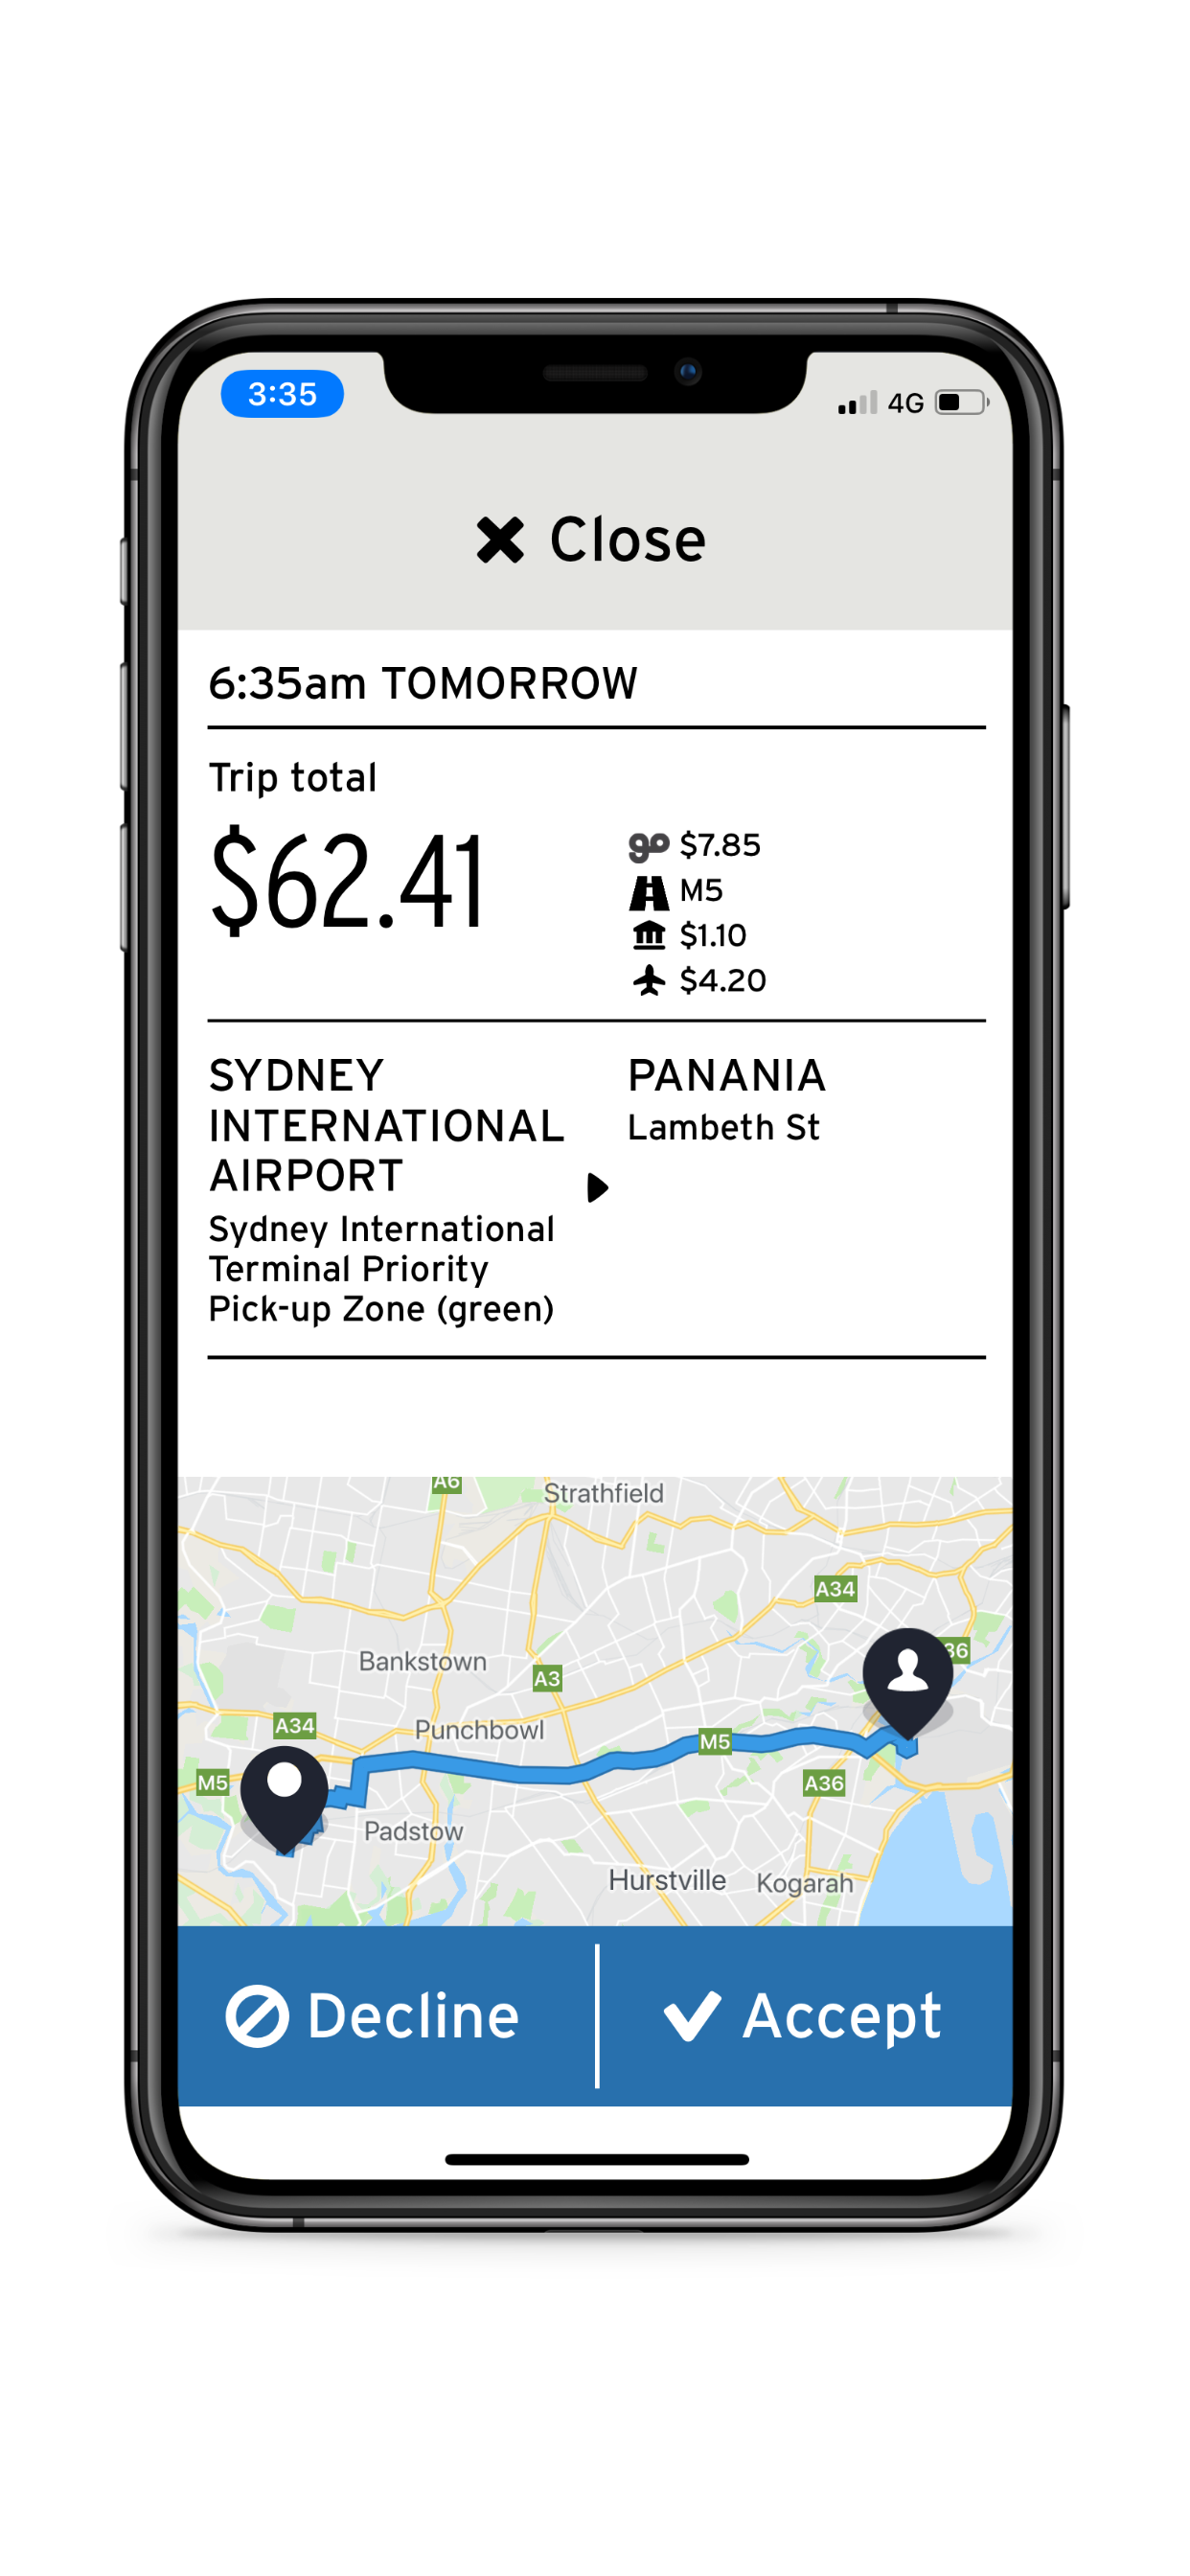 iphone showing fixed fares